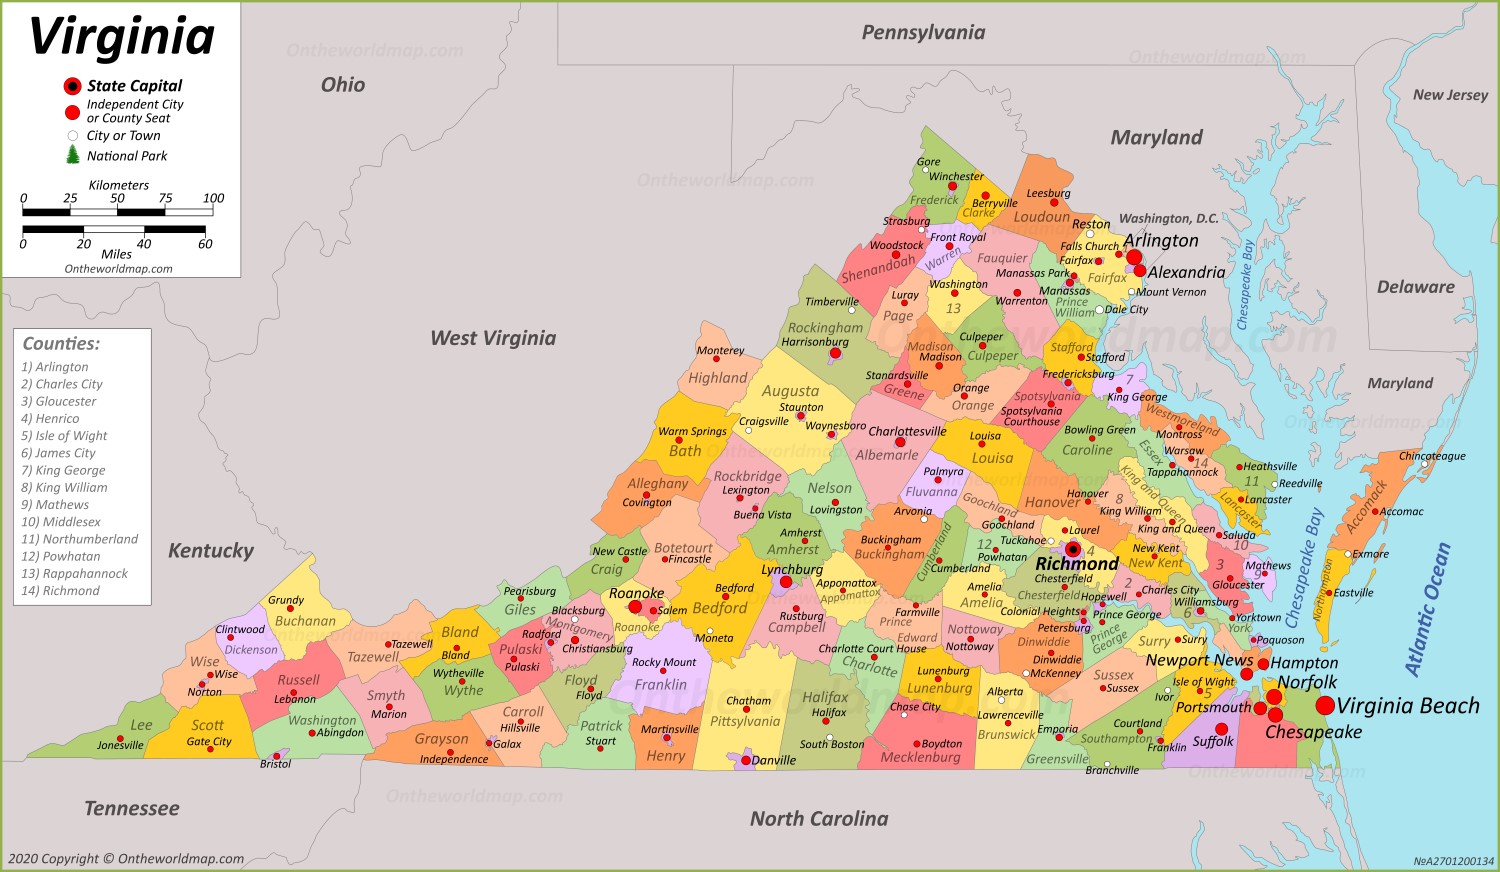 virginia on the map of the united states Virginia State Maps Usa Maps Of Virginia Va virginia on the map of the united states